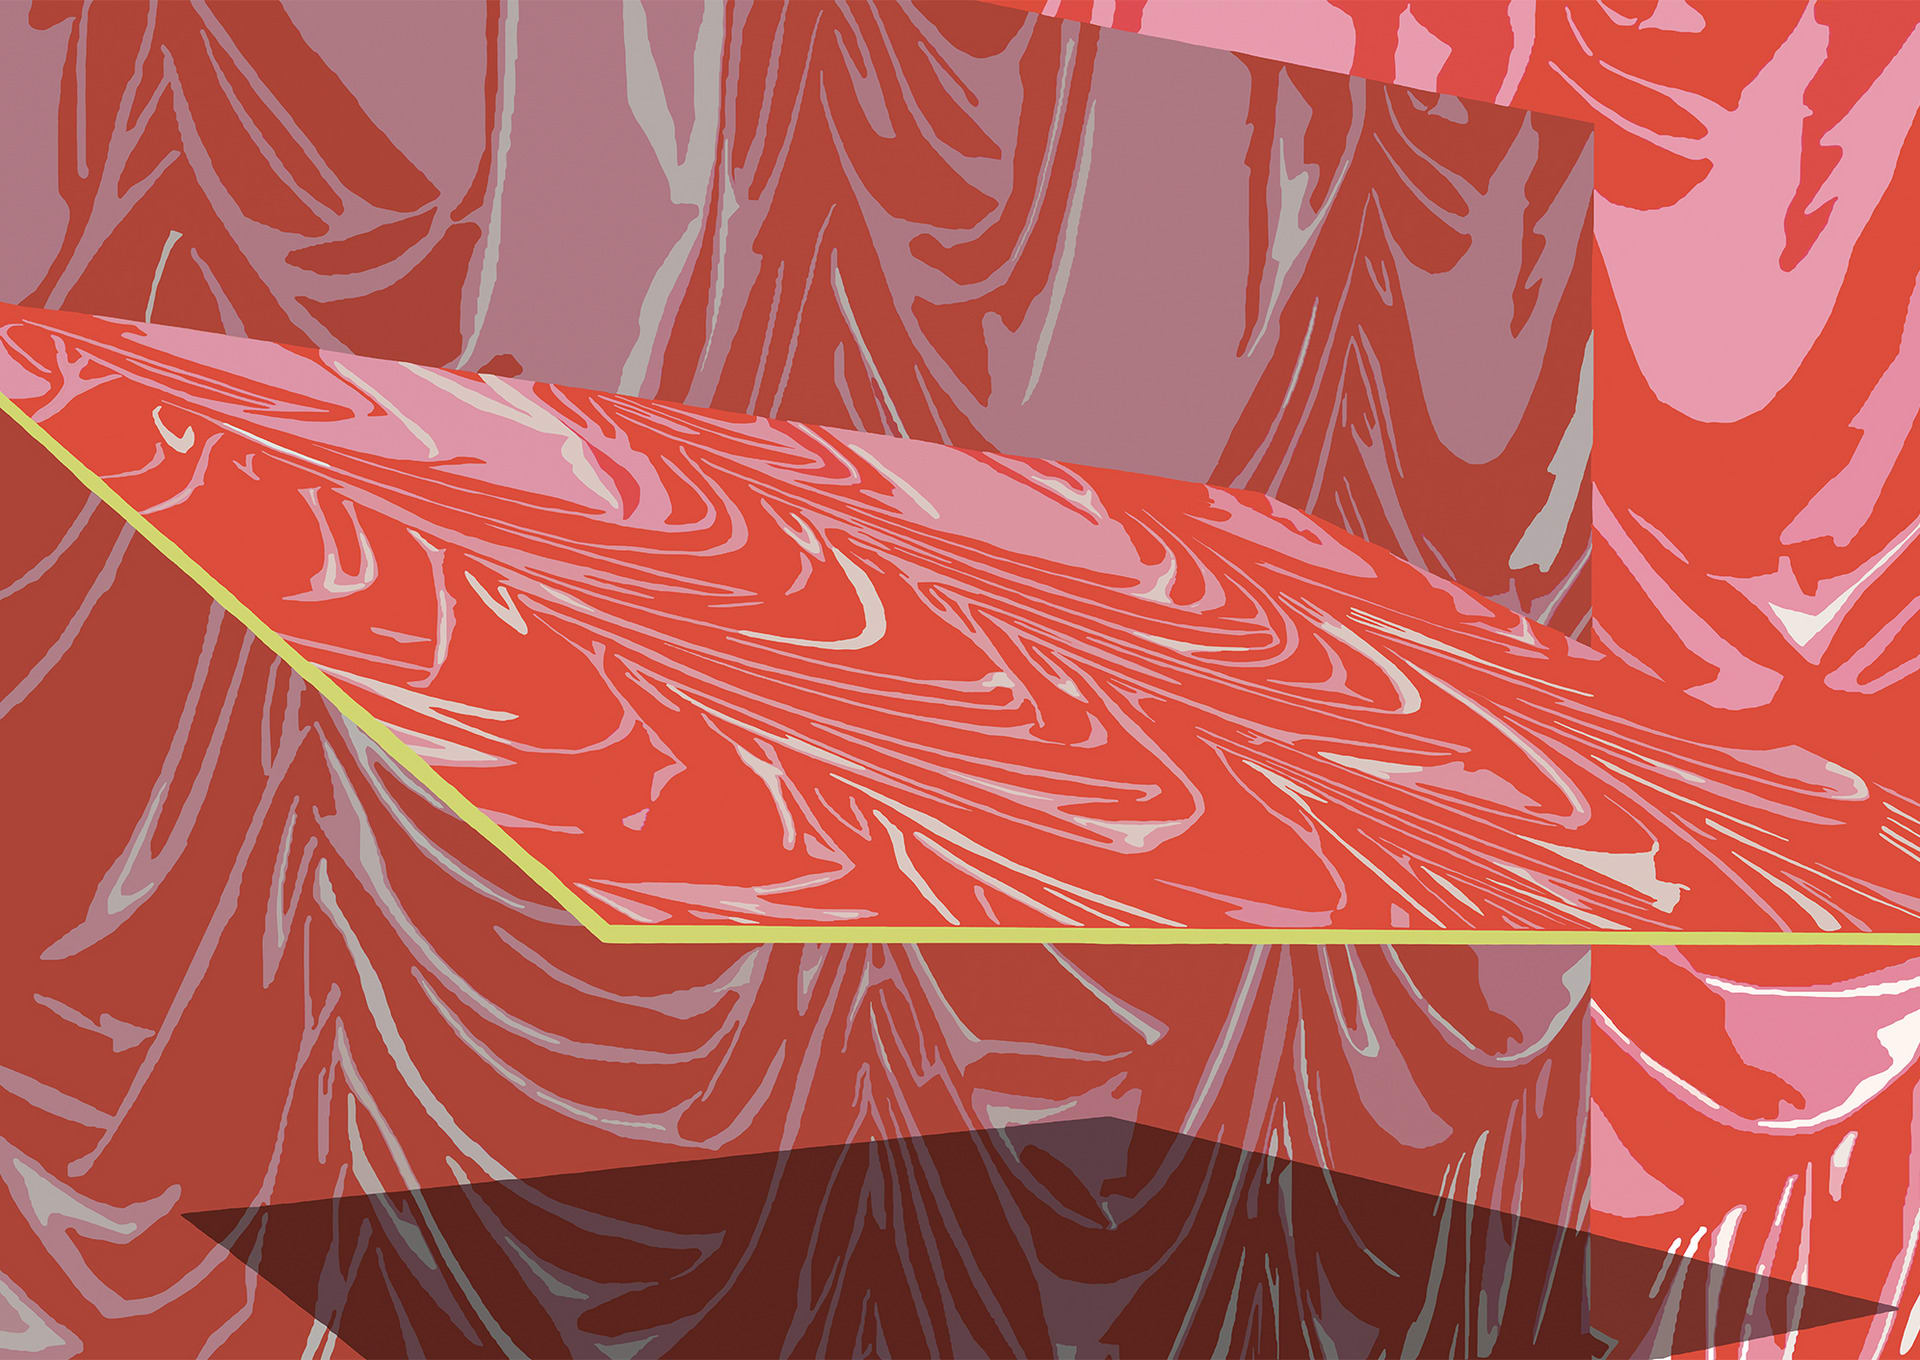 Levitating planes of vibrant abstracted curtain folds of red, pink and yellow